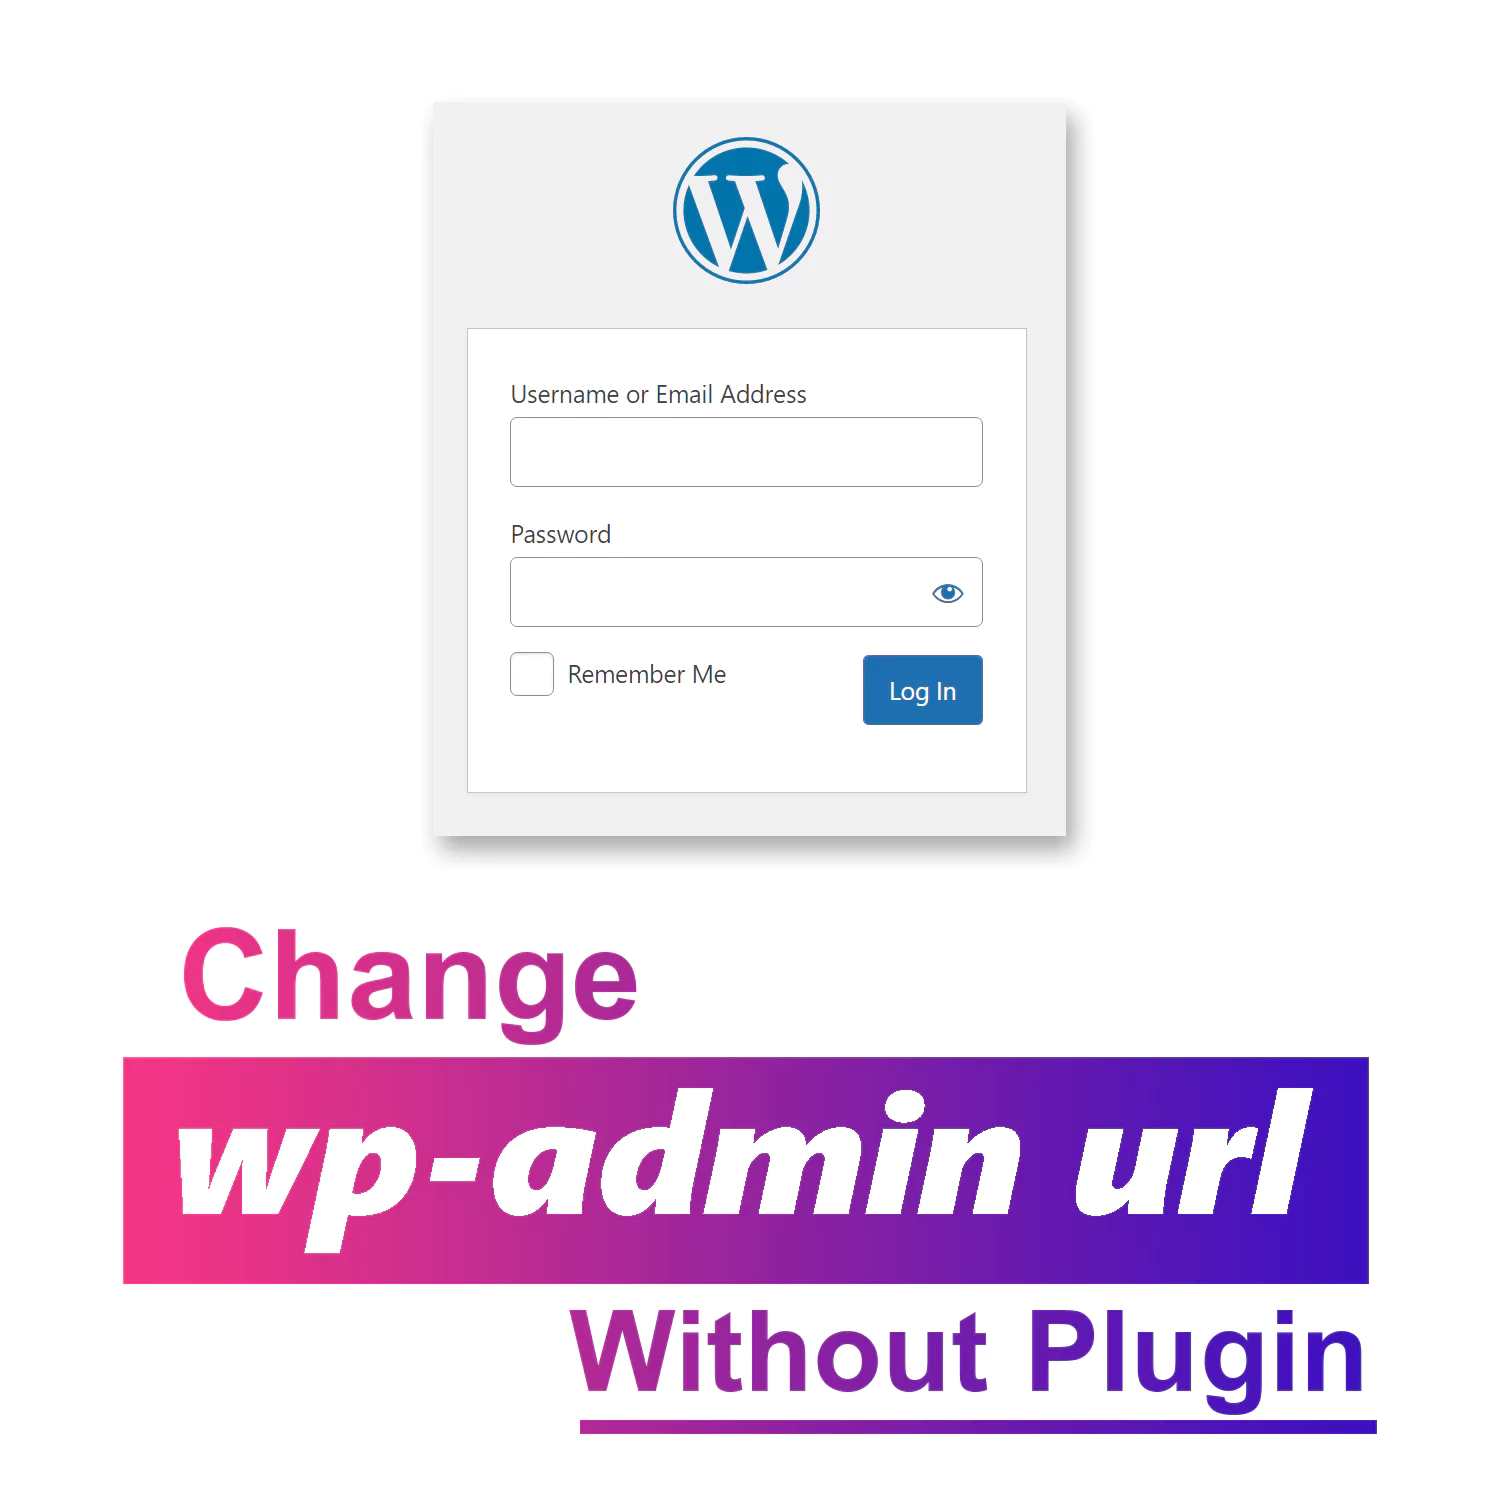 How to change wp-admin URL [Without Plugins]